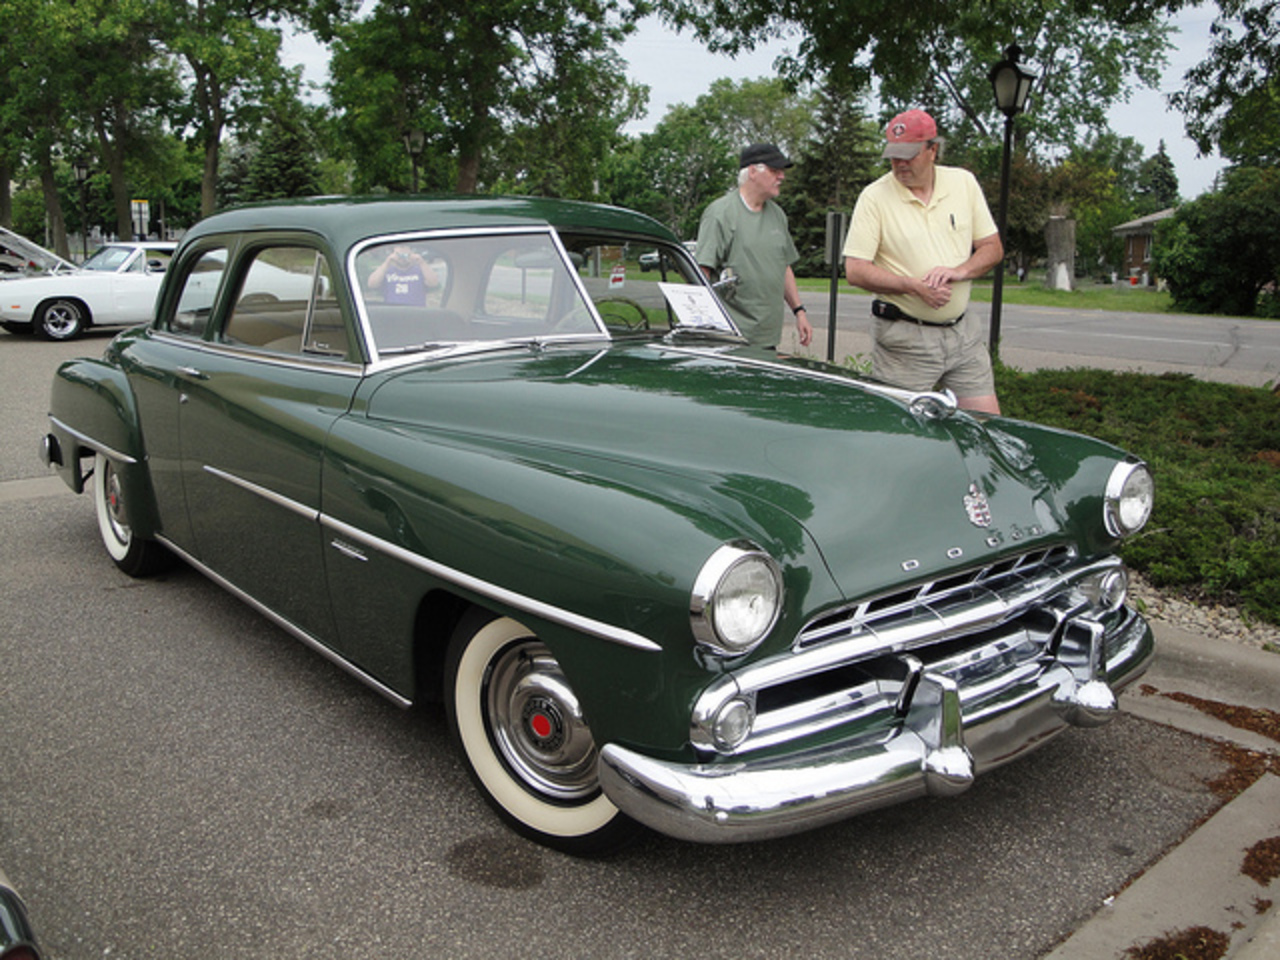 51 Dodge Coronet Club Coupe by DVS1mn